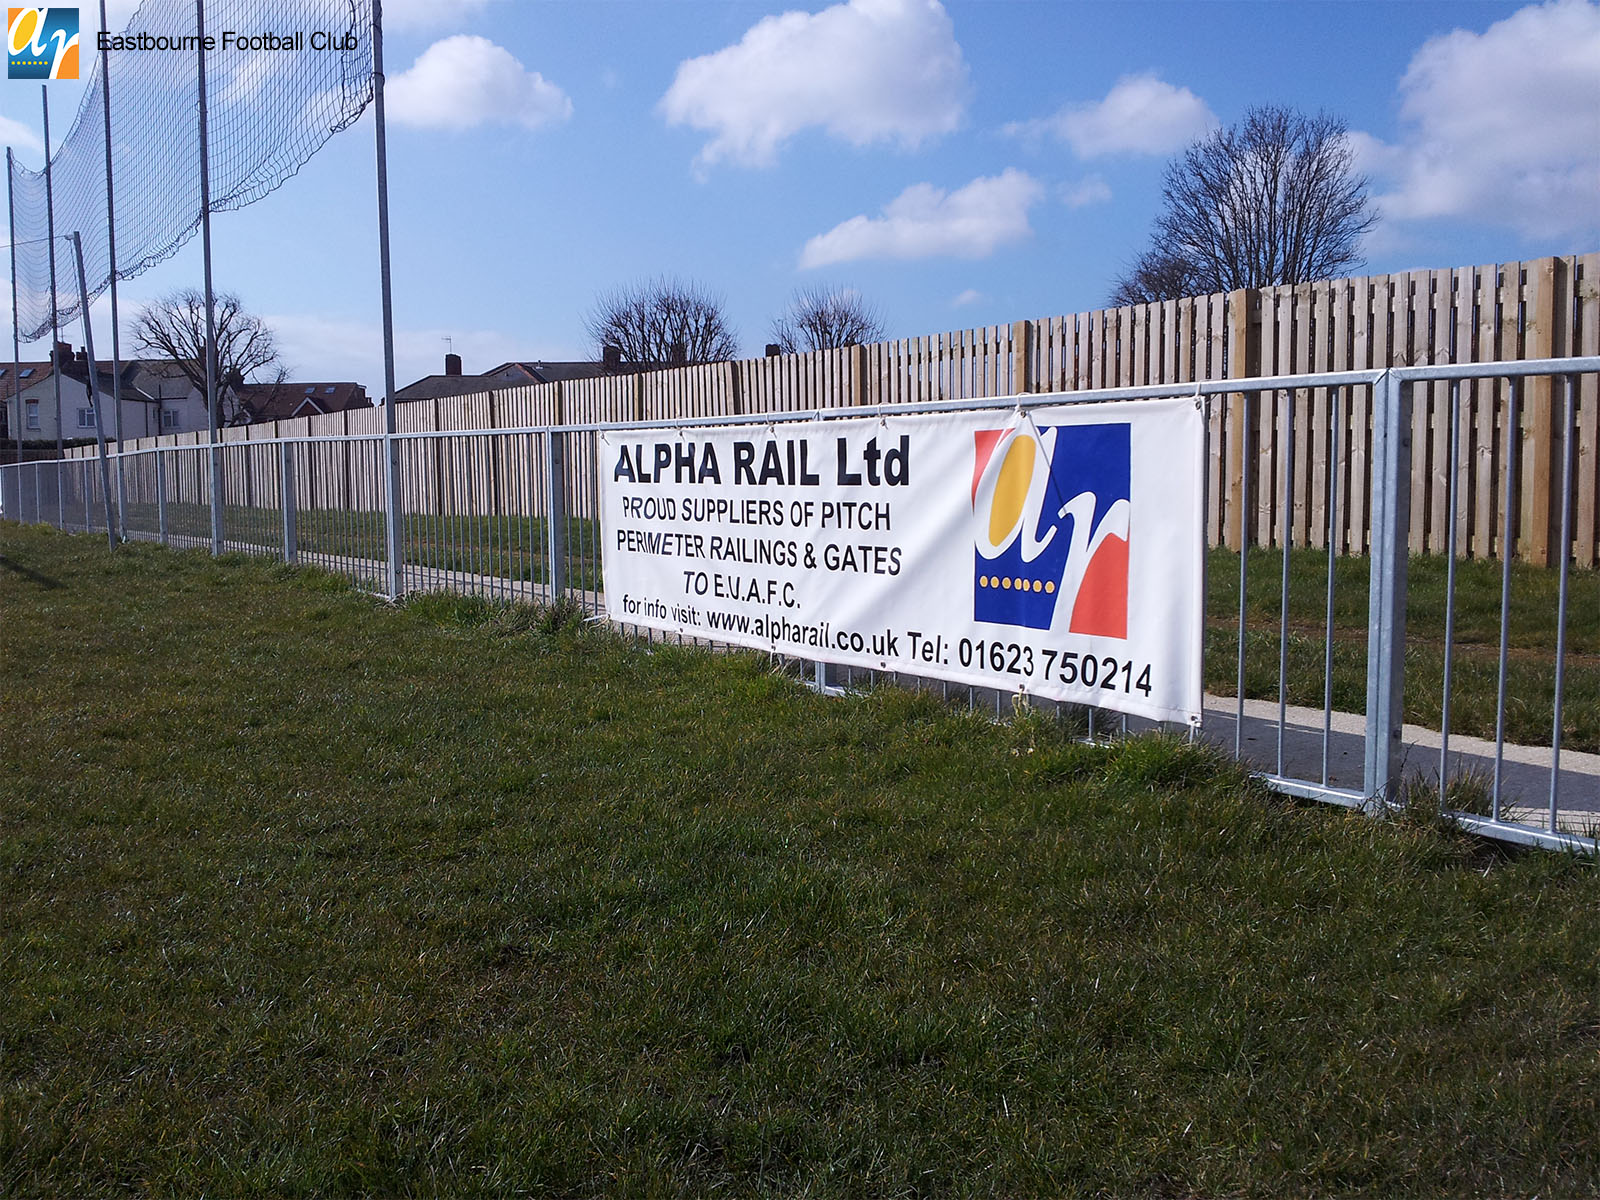 Metal sports pitch barrier